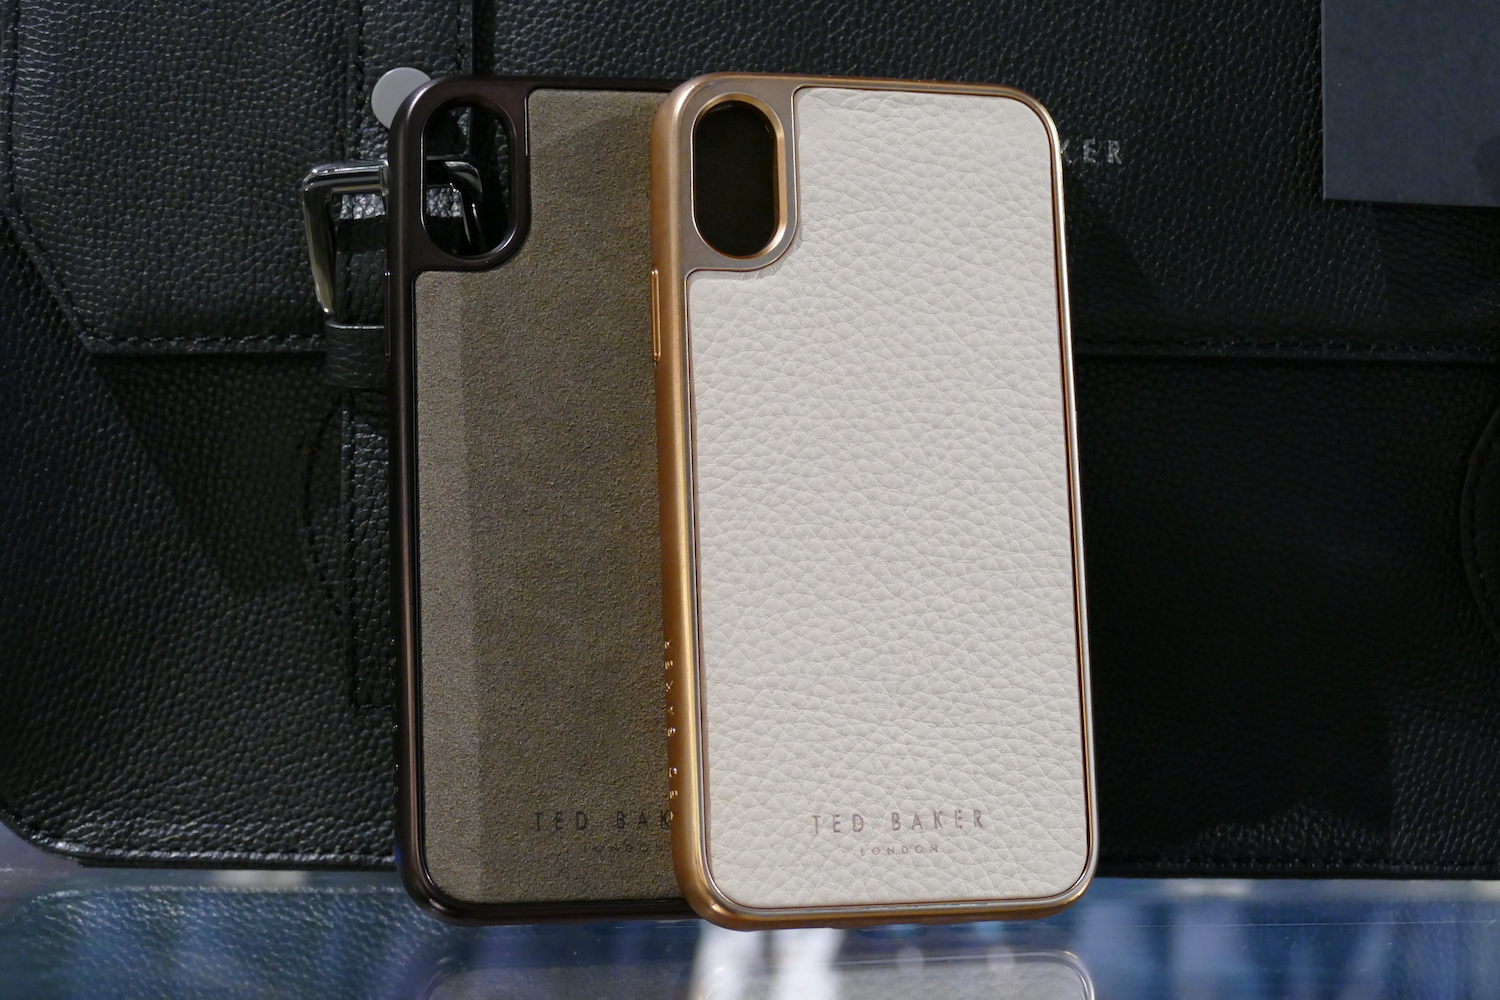 ted baker iphone connected news cases 2018